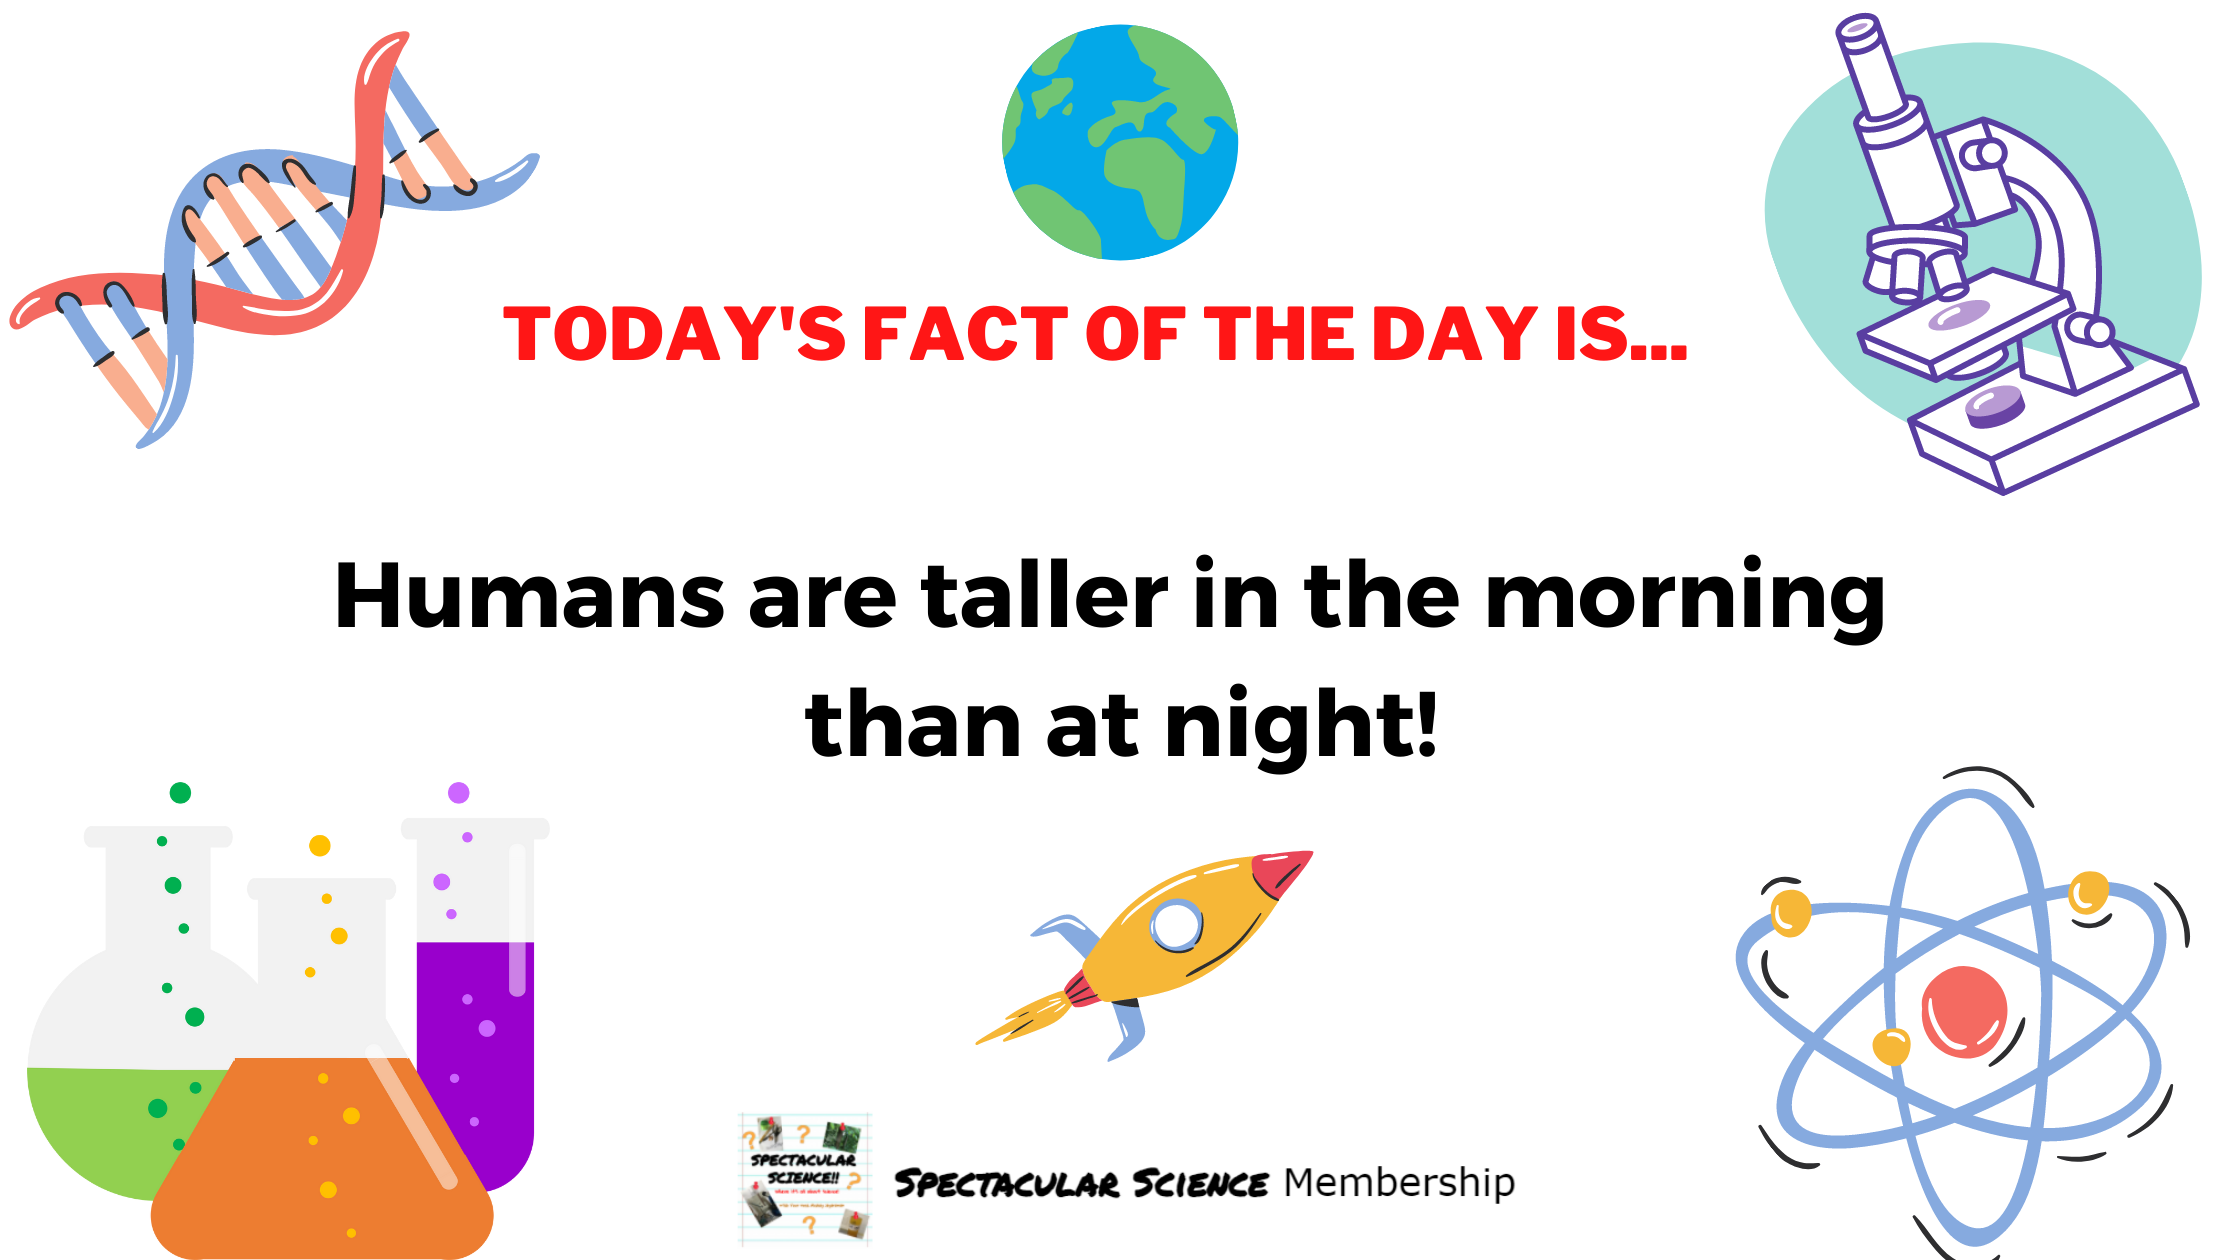 Fact of the Day Image Nov. 22nd